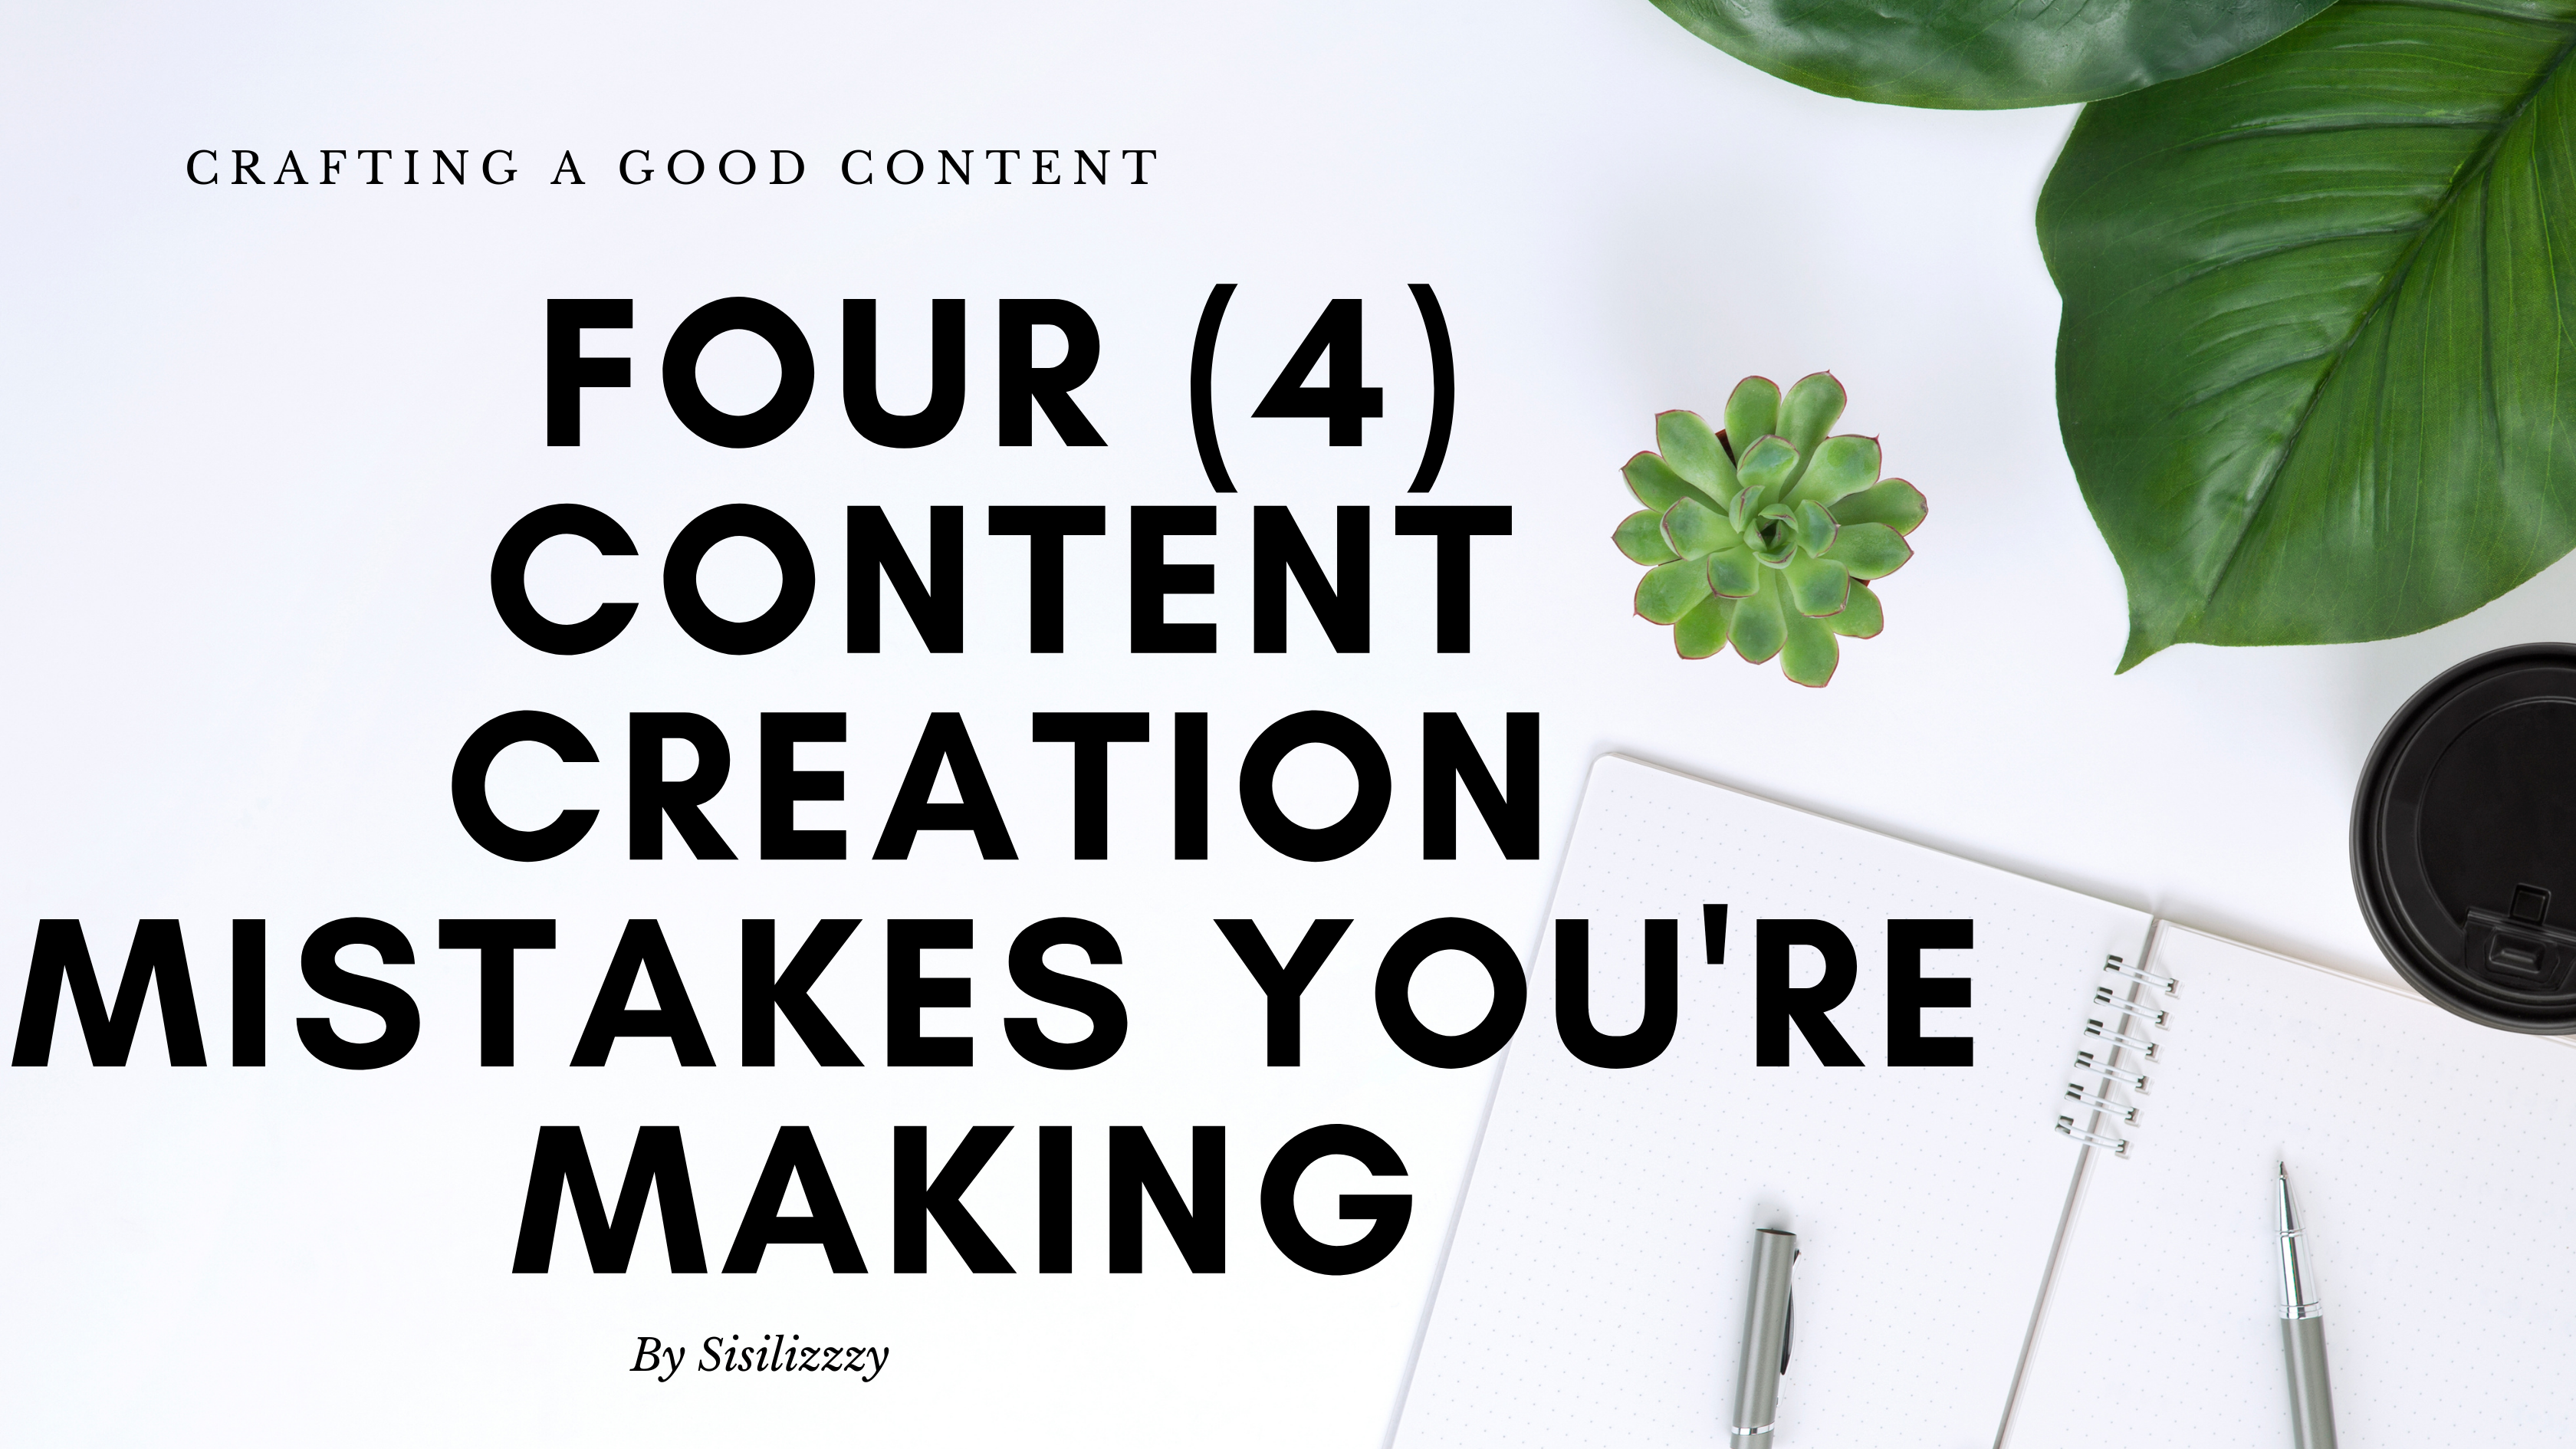 Four (4) Content Creation Mistakes You’re Making No.3 is very Important